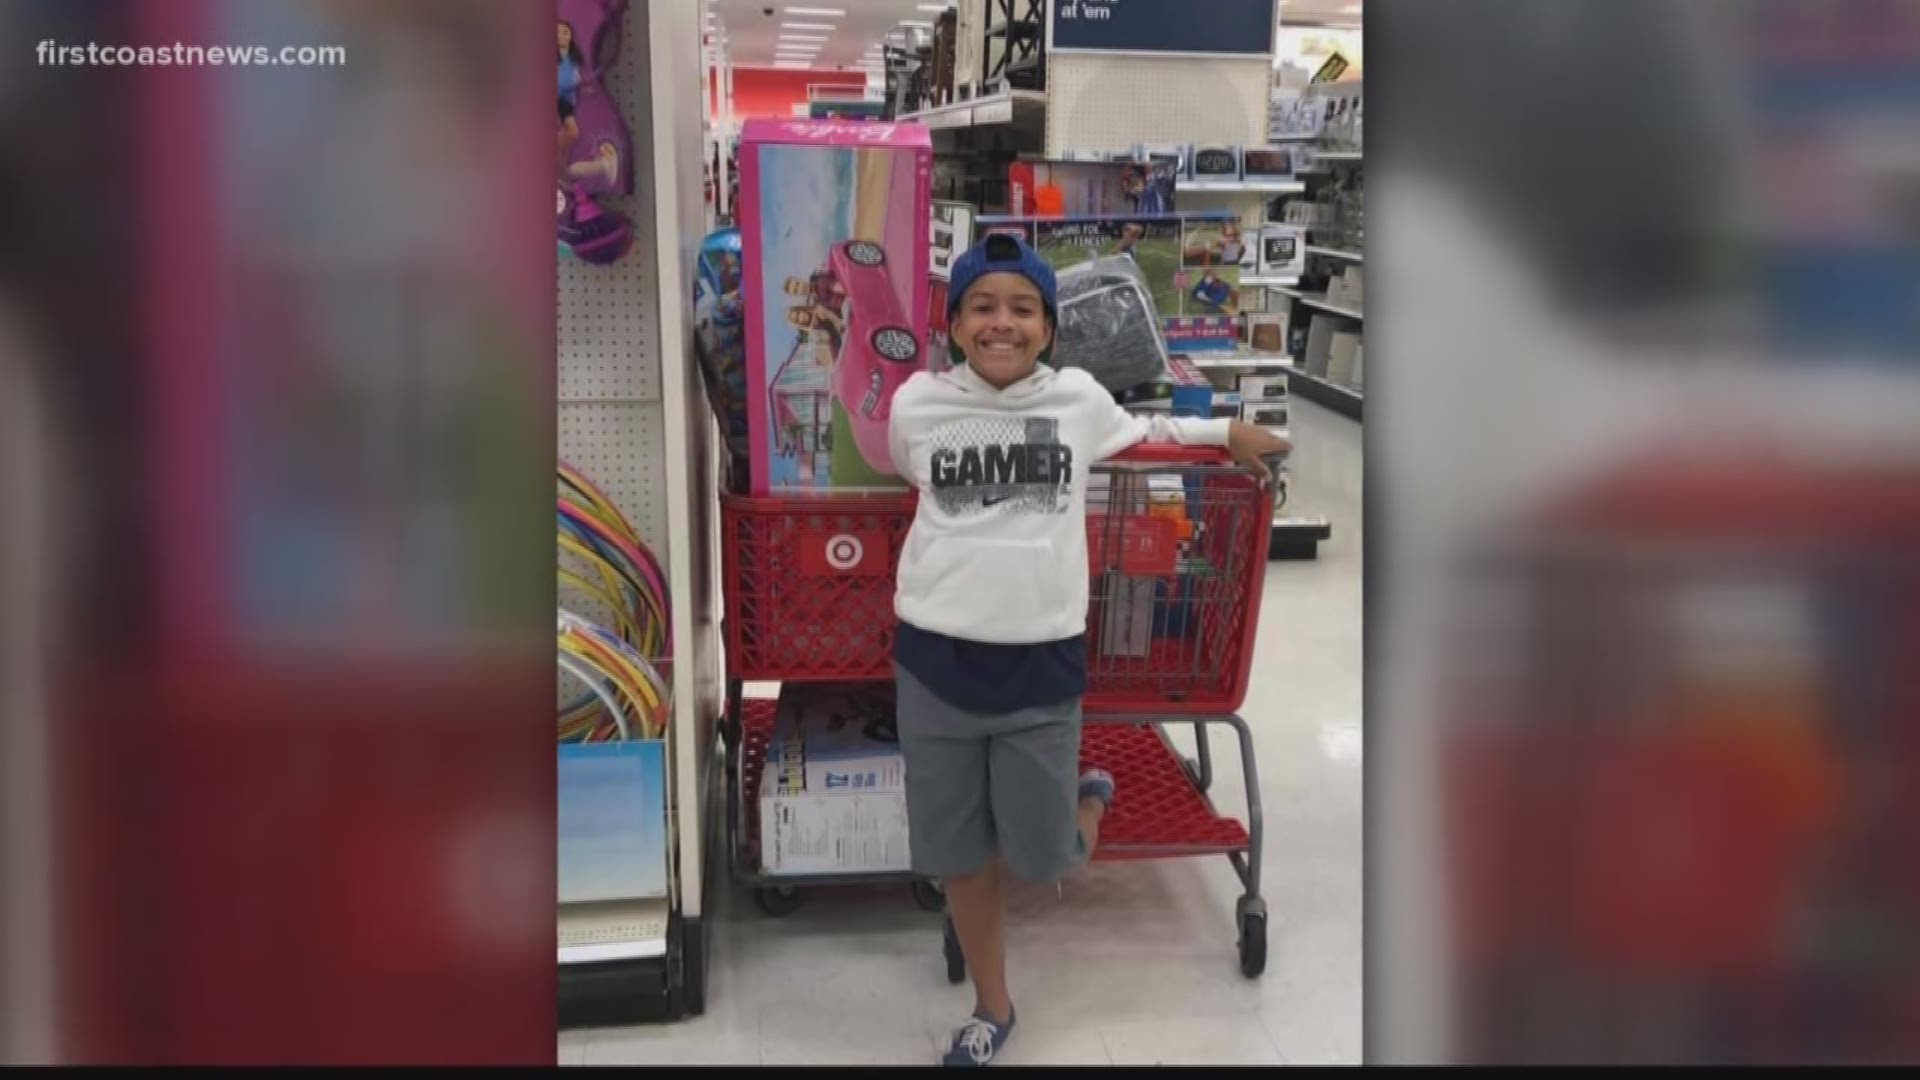 A Jacksonville boy is collecting toys to deliver to children in need on the First Coast.